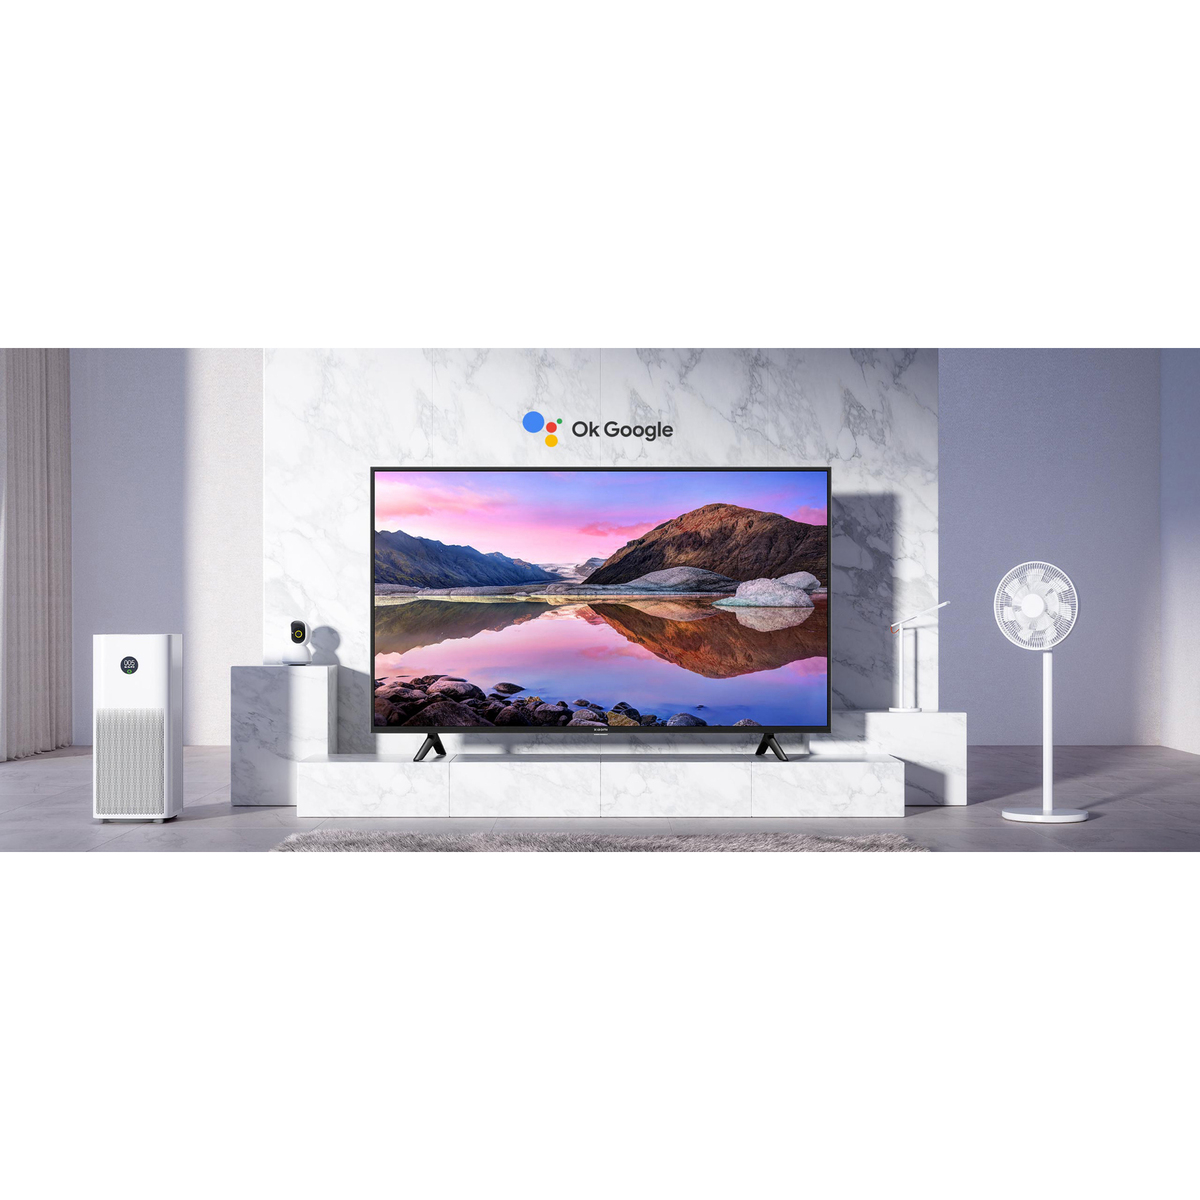 Mi 55 inches 4K UHD Android Smart TV, Black, L55M7-EAME